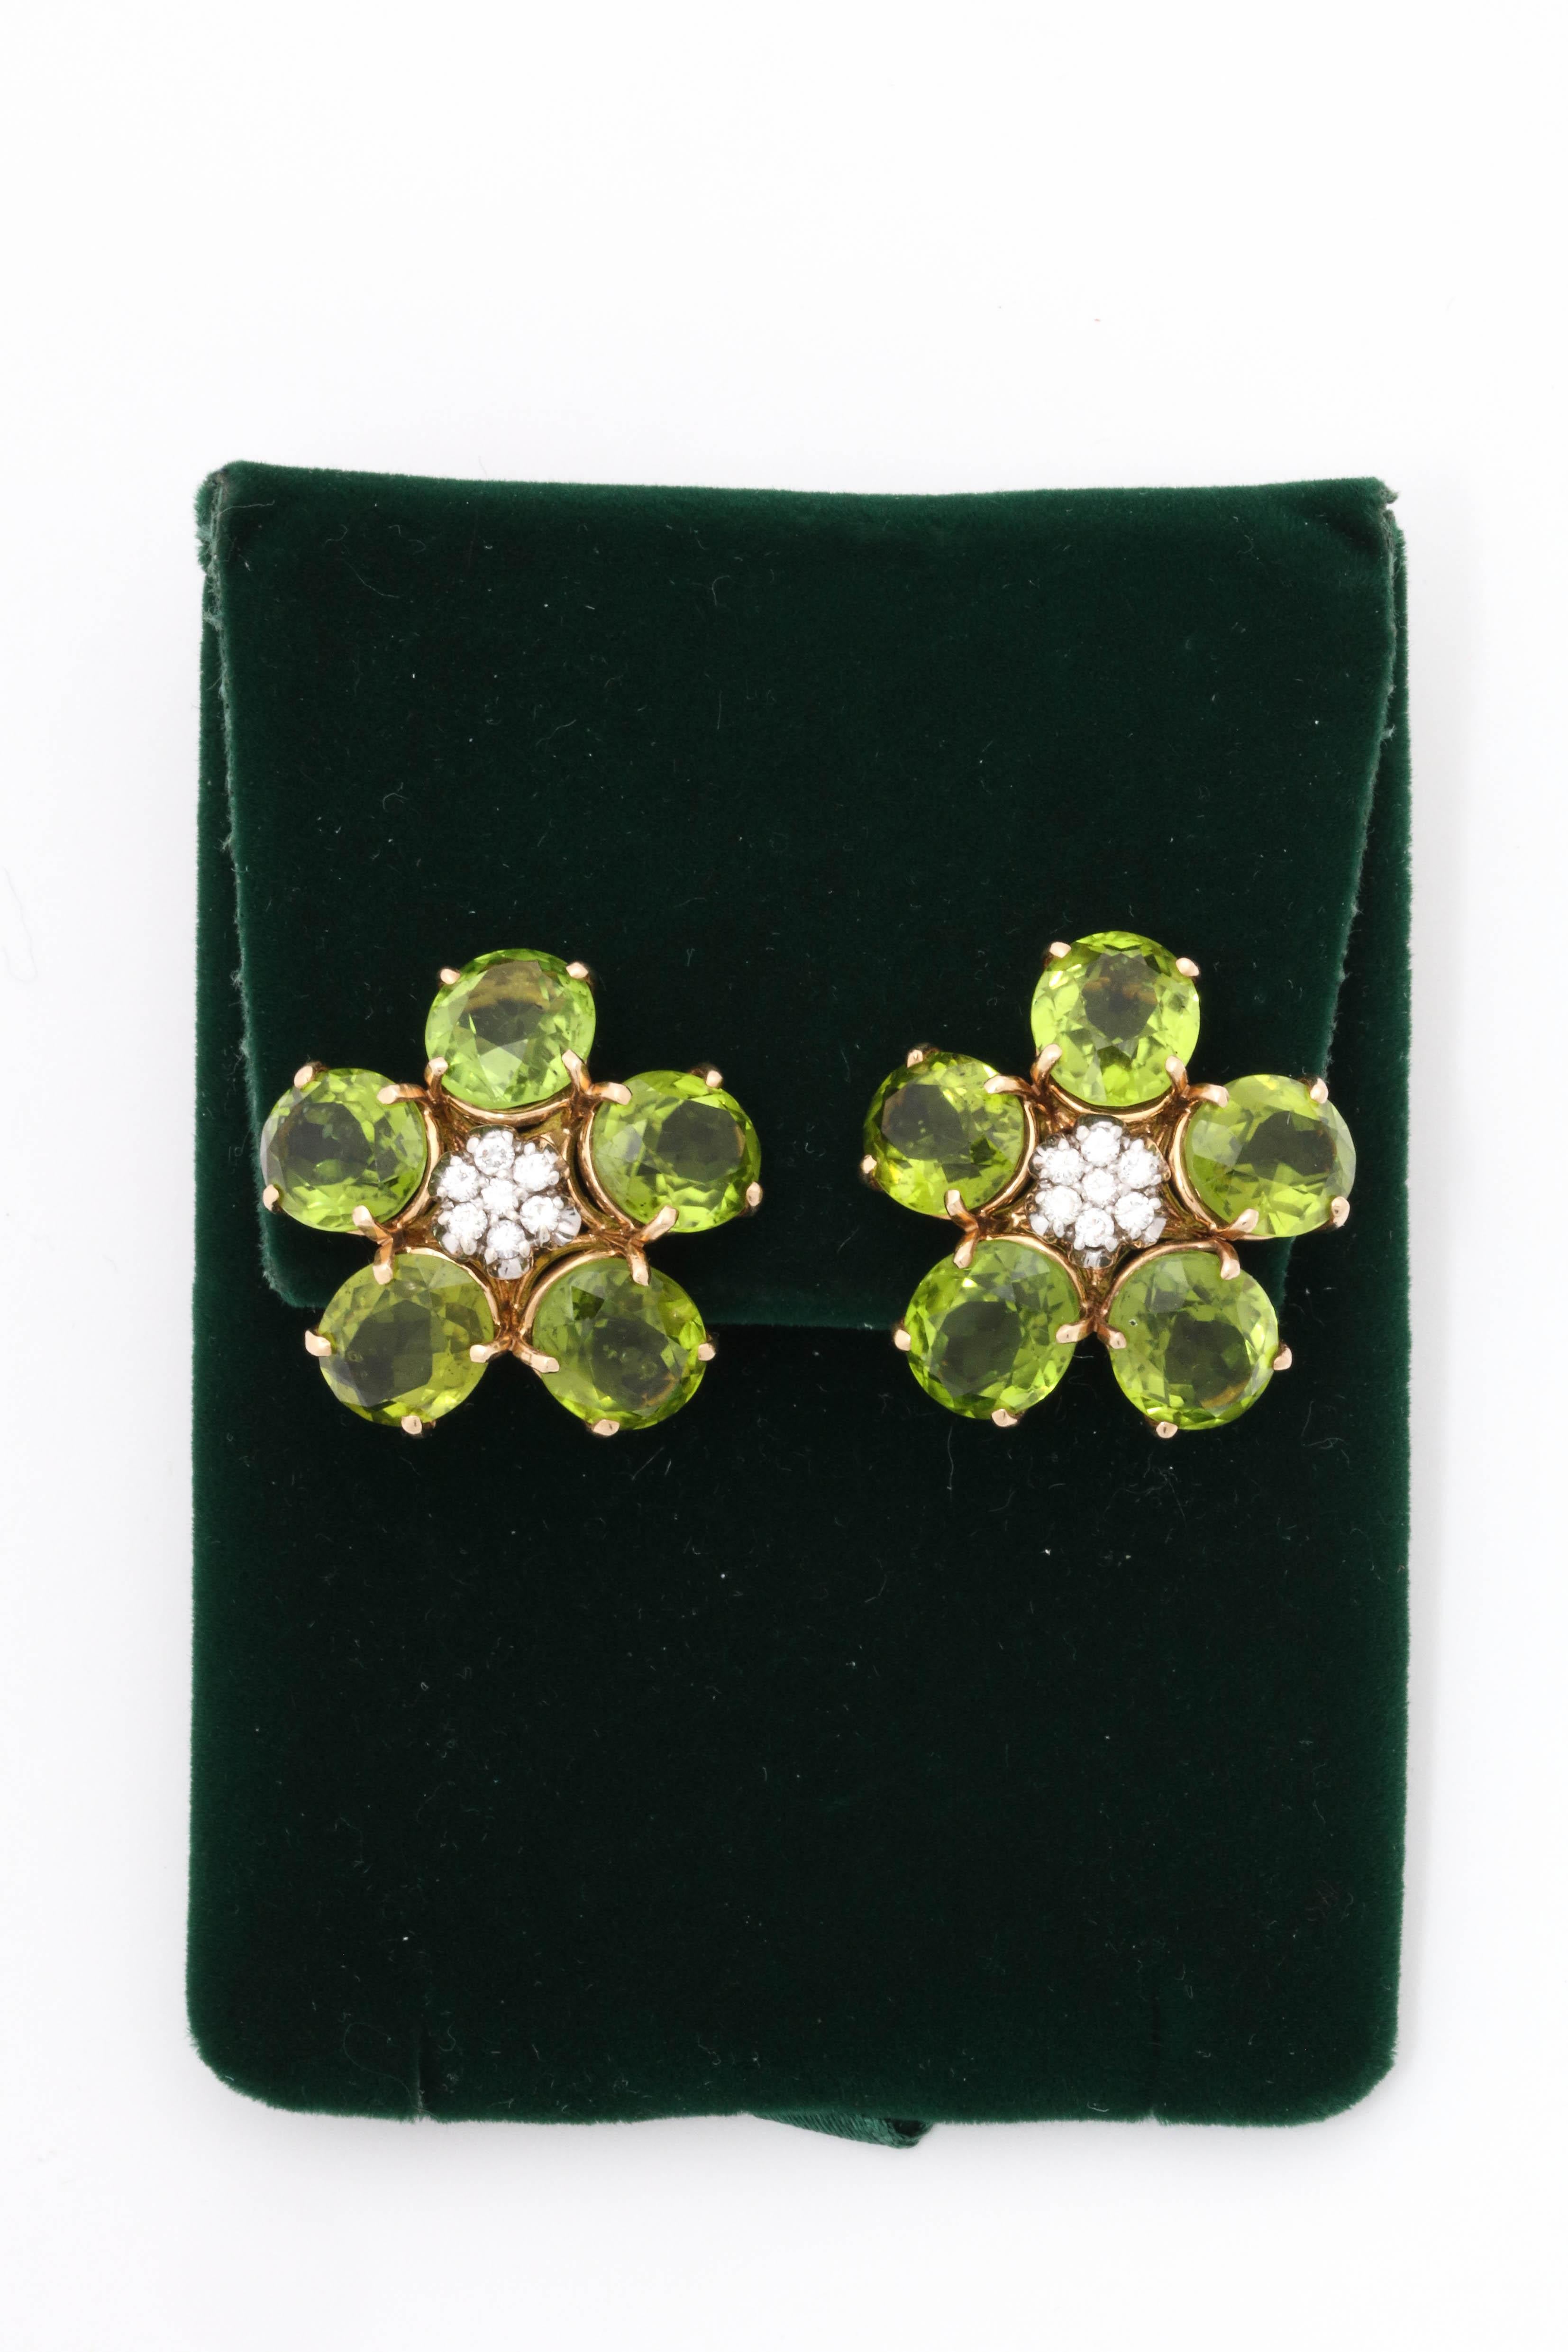 One Pair Of Ladies 18kt Yellow Gold Earclips Designed With Ten Large Peridot Stones Weighing Approximately 50 Carats Total Weight. Earrings Are Further Embellished With Two Diamond Cluster Centers Weighing Approximately 1 Carat Total weight. NOTE: